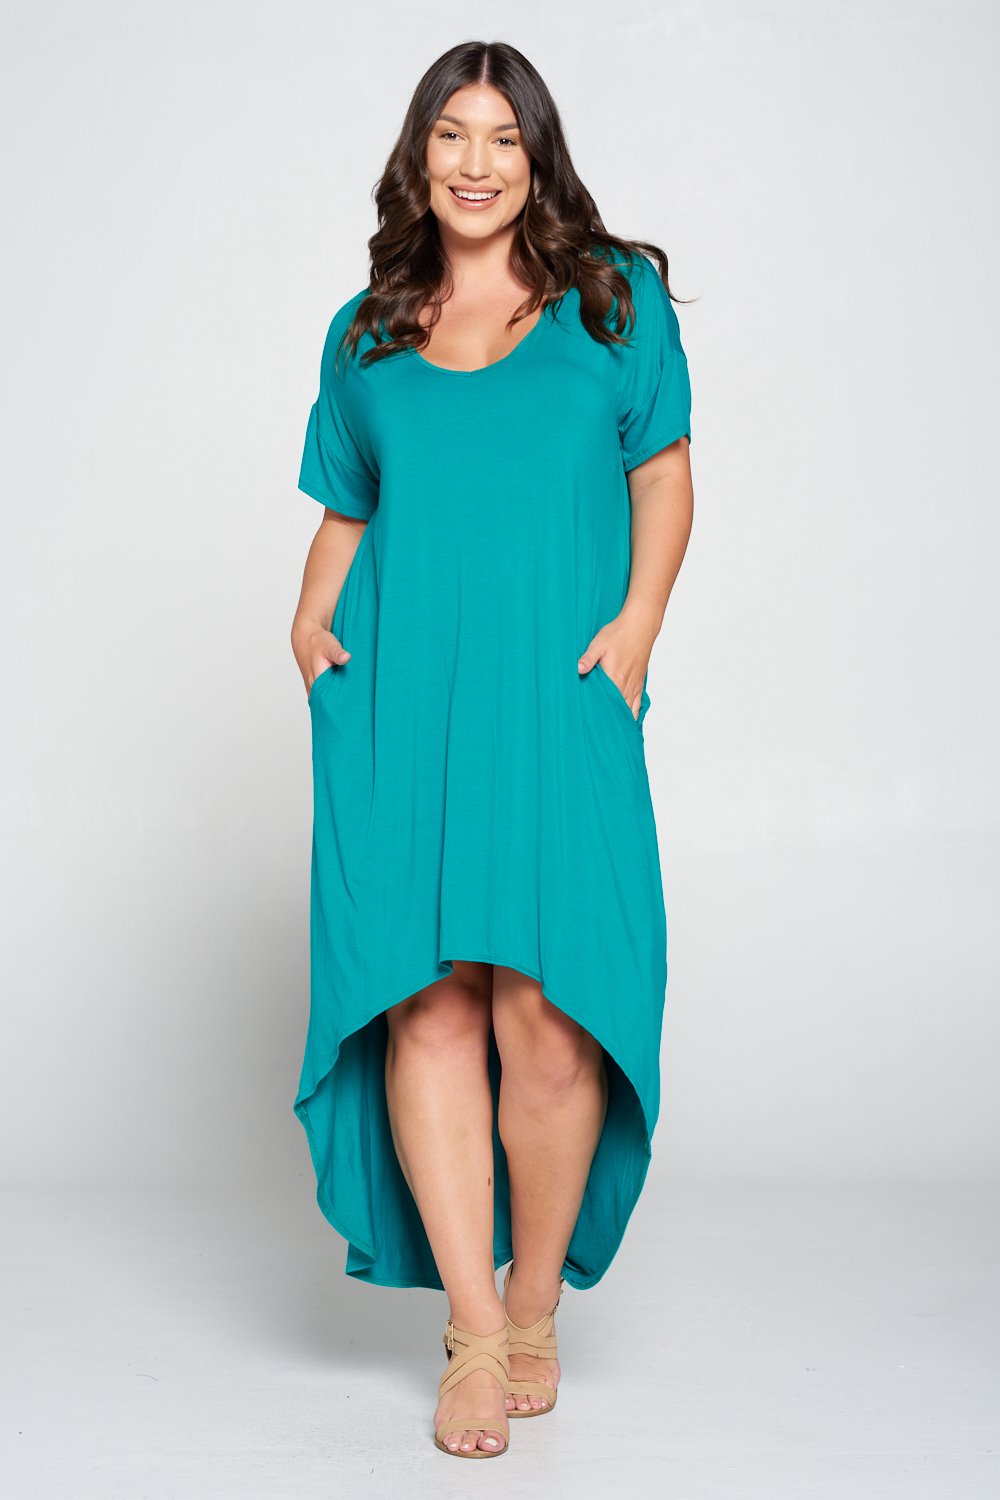 livd L I V D women's contemporary plus size clothing high low hi lo dress with pockets v neck sleeves in jade